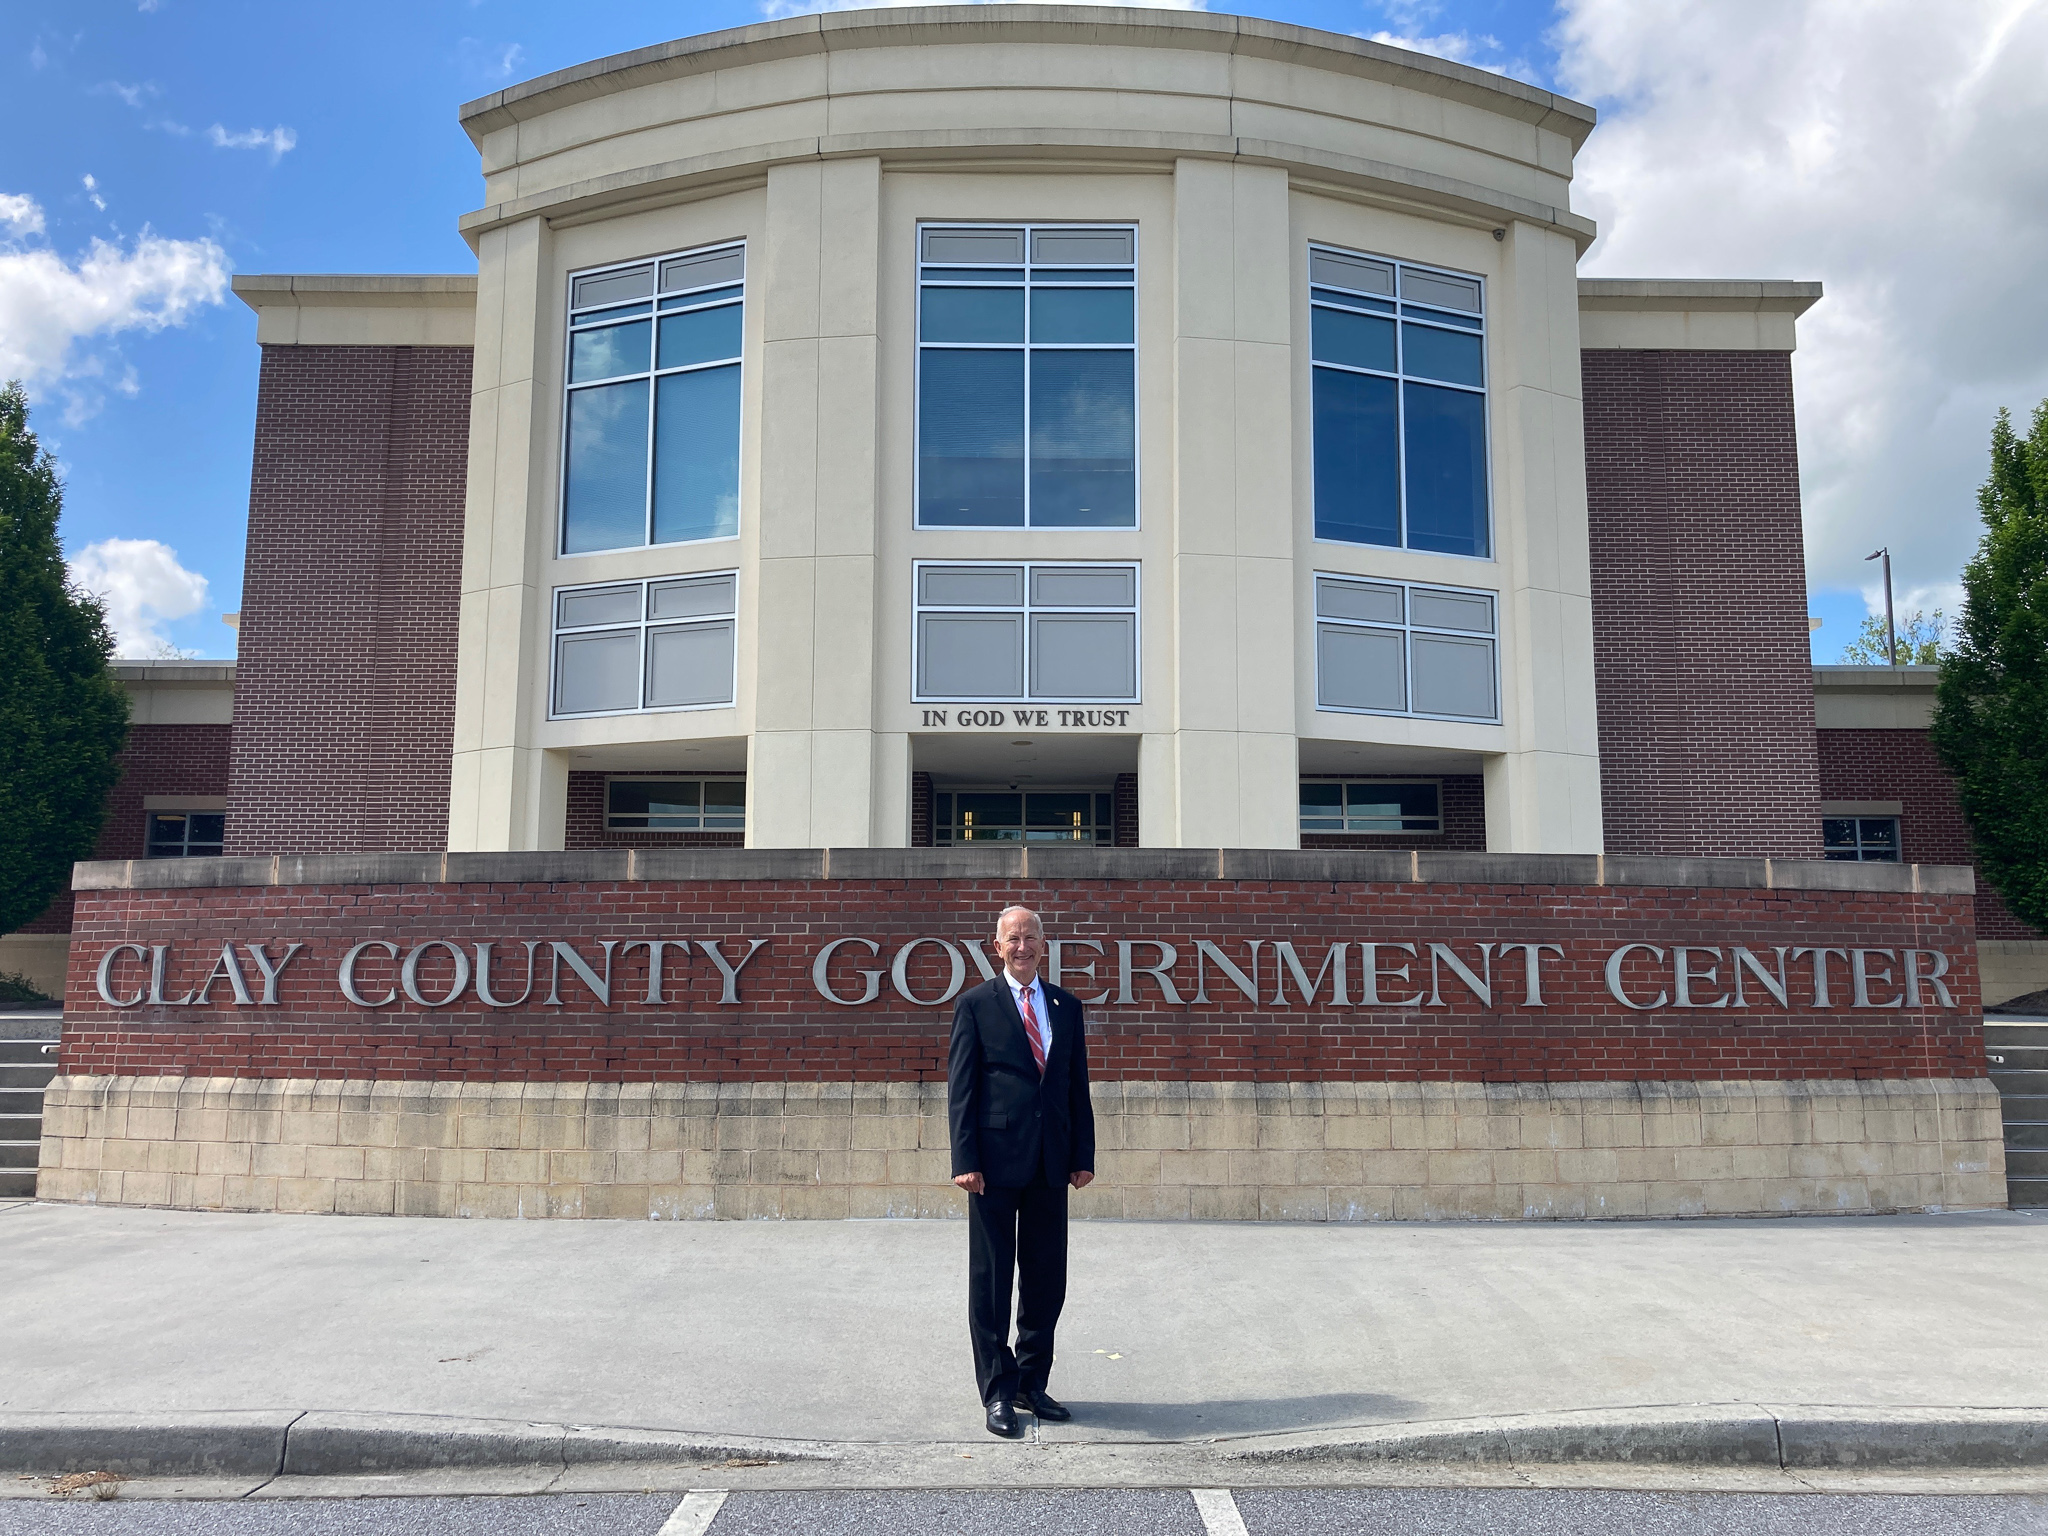 Chief Justice Newby outside of the Clay County Government Center